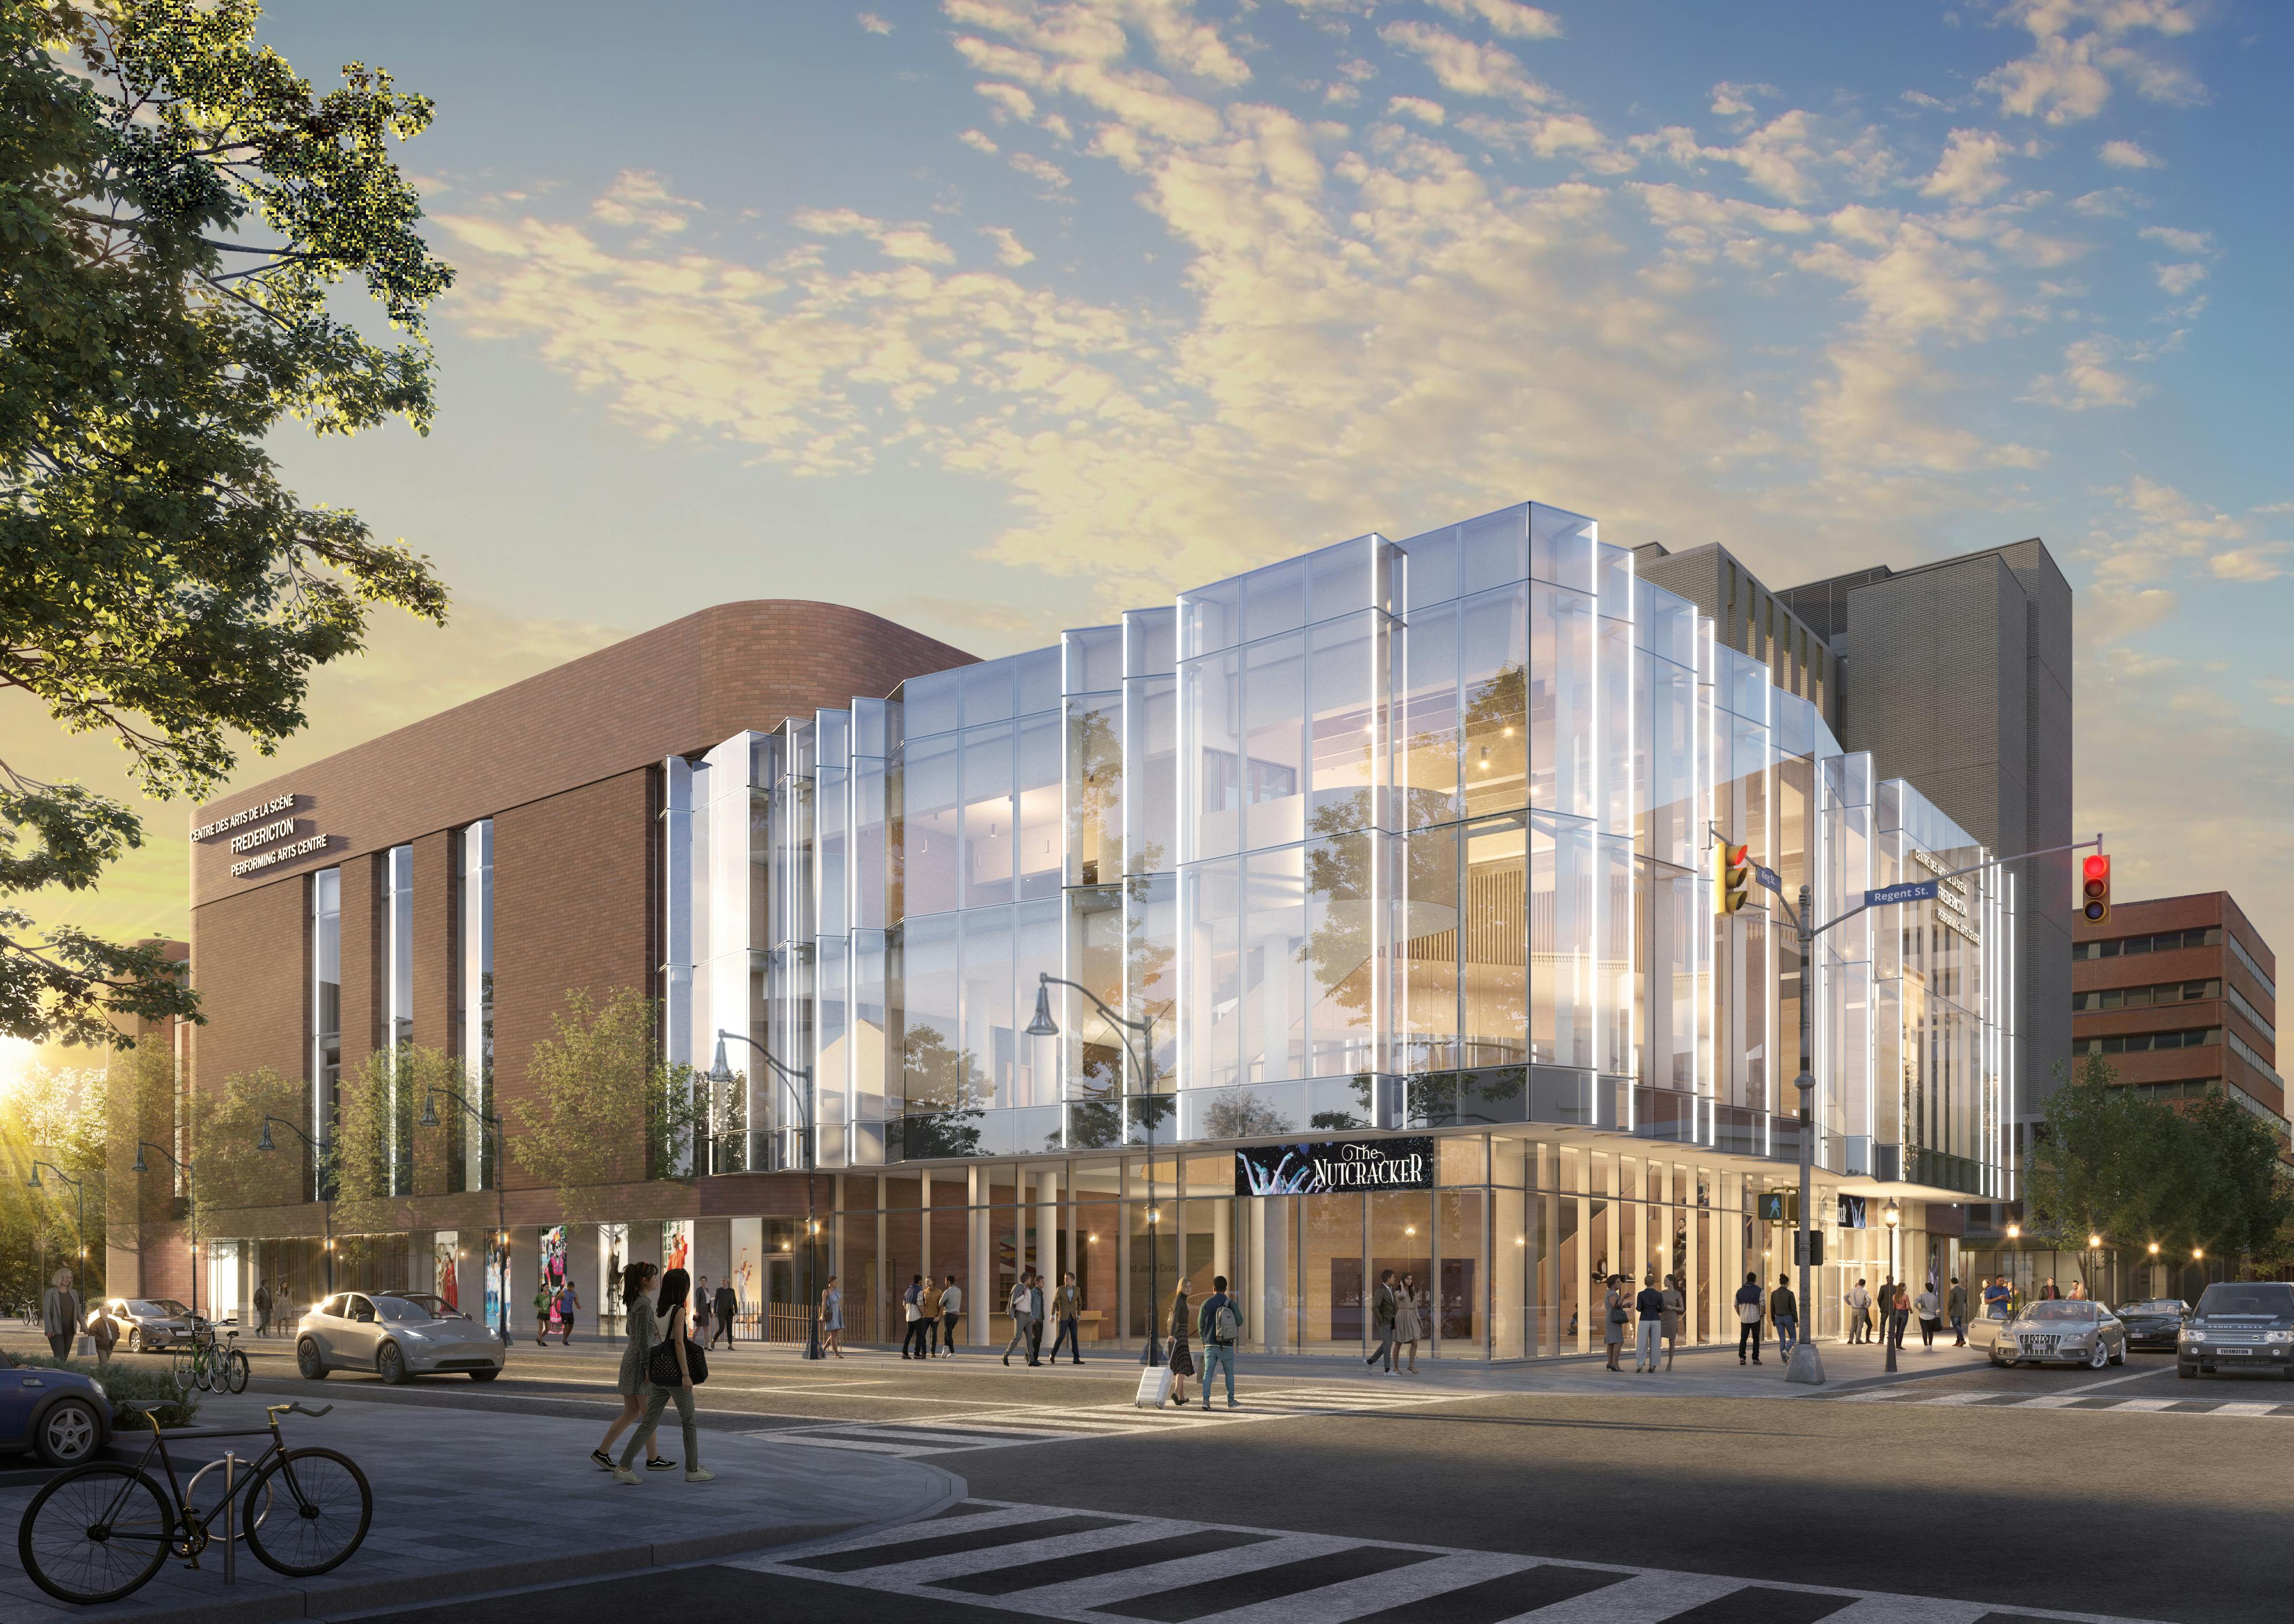 Donation to support accessible design of new Fredericton Performing Arts Centre